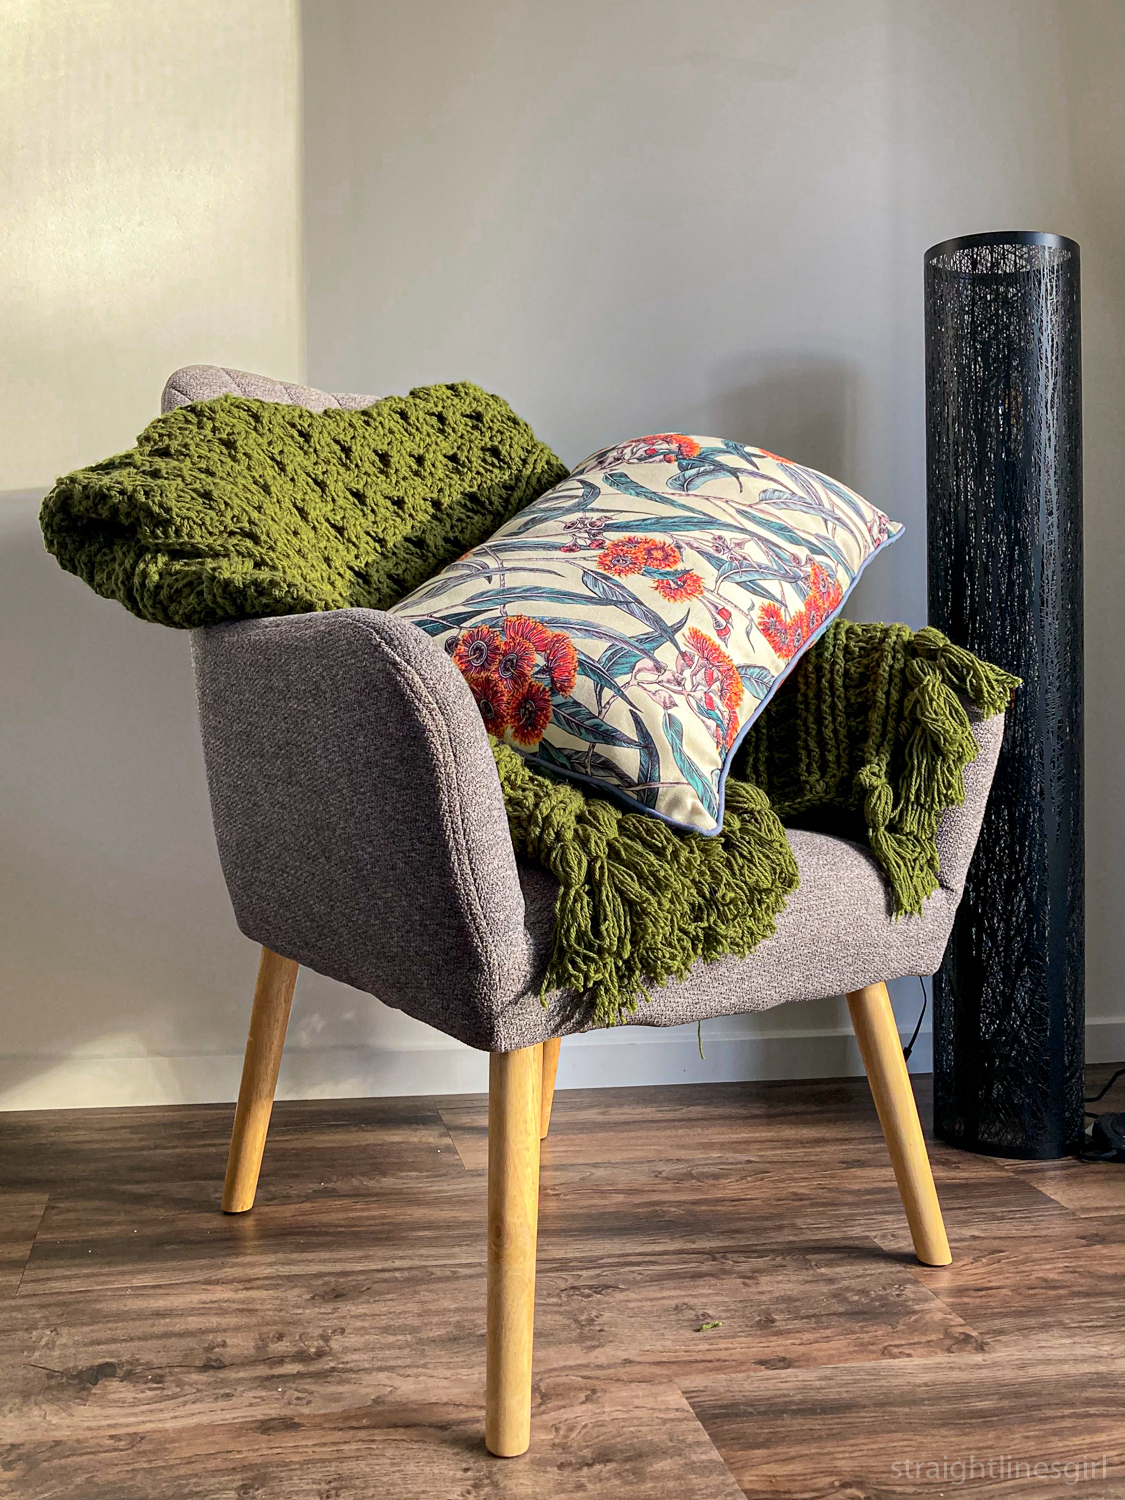 A grey chair with a green throw rug and a long cushion with a Tasmanian native plant design